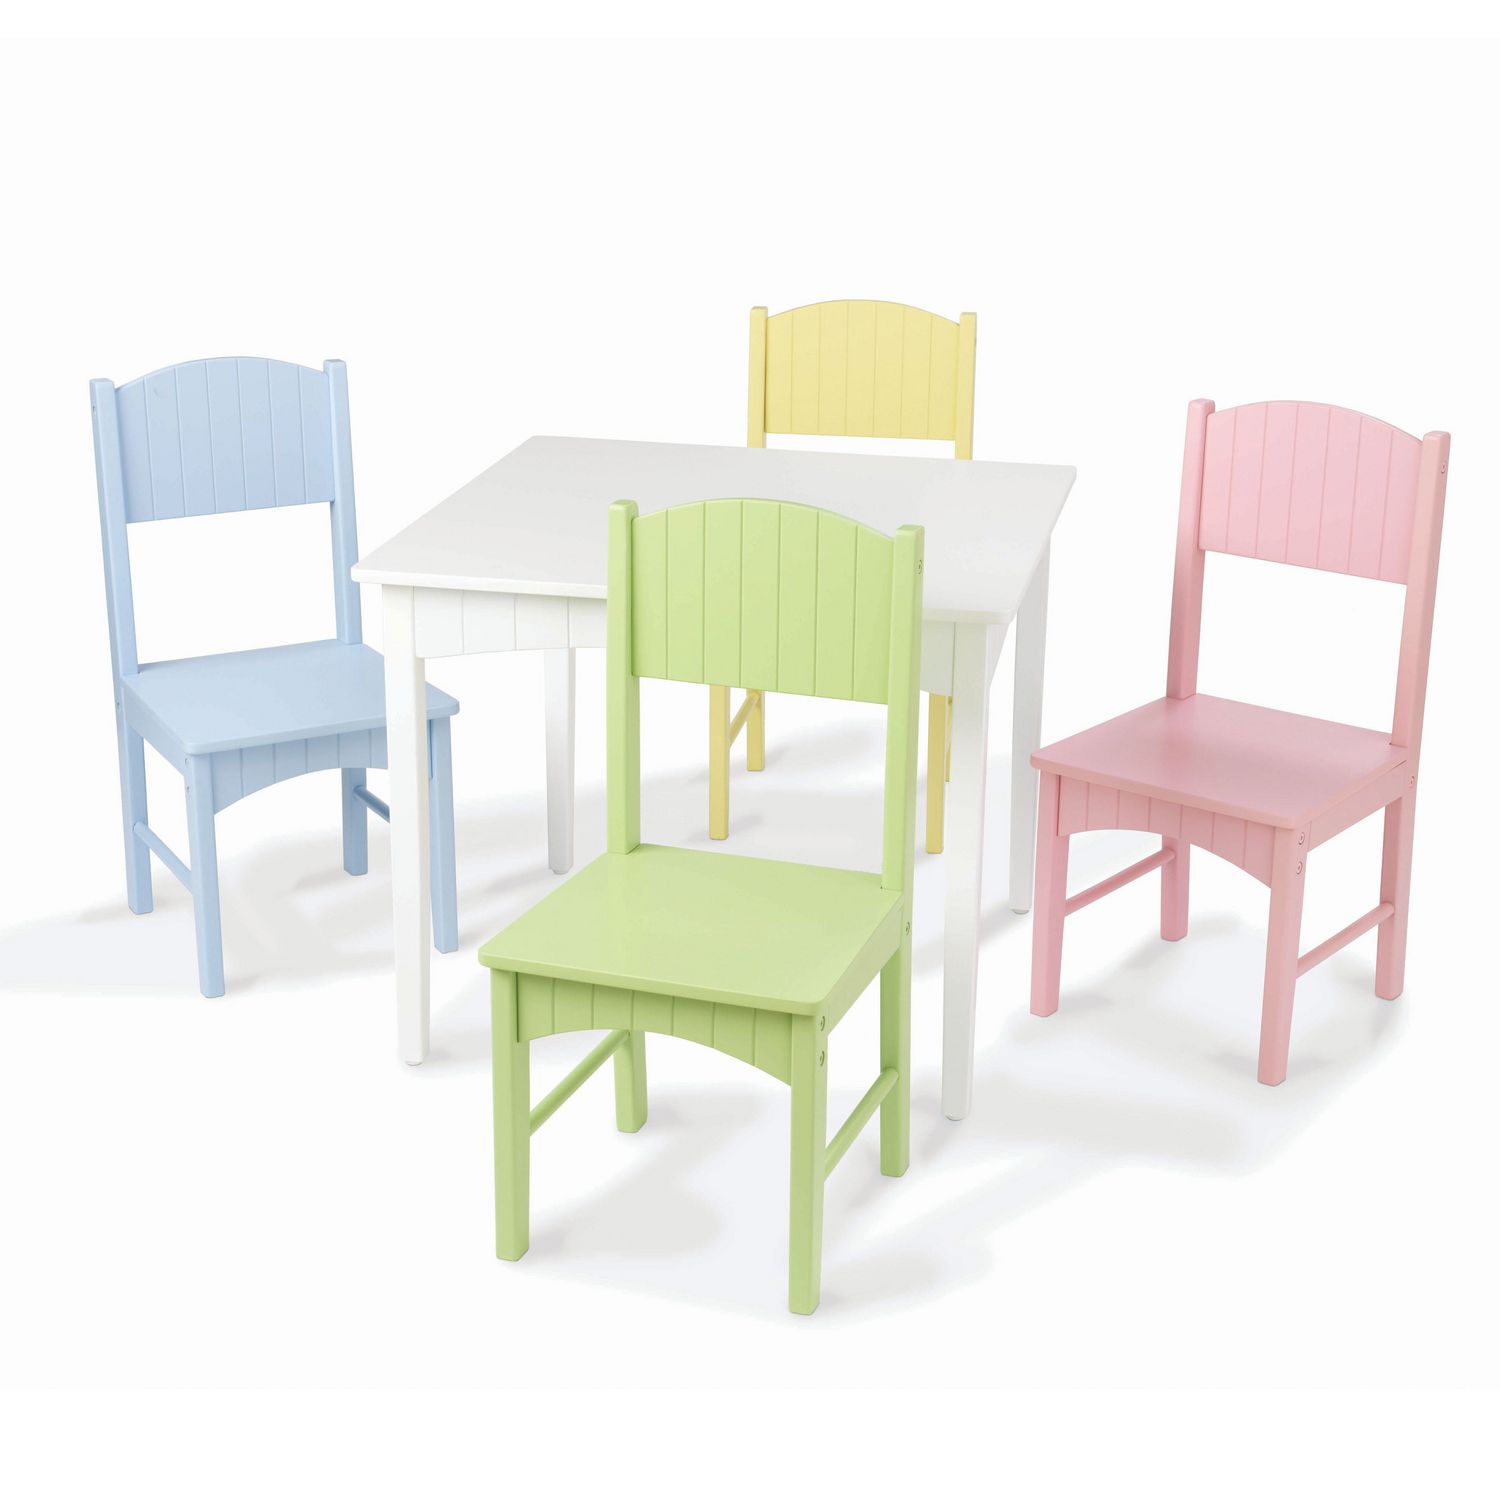 kidkraft table and chairs canada